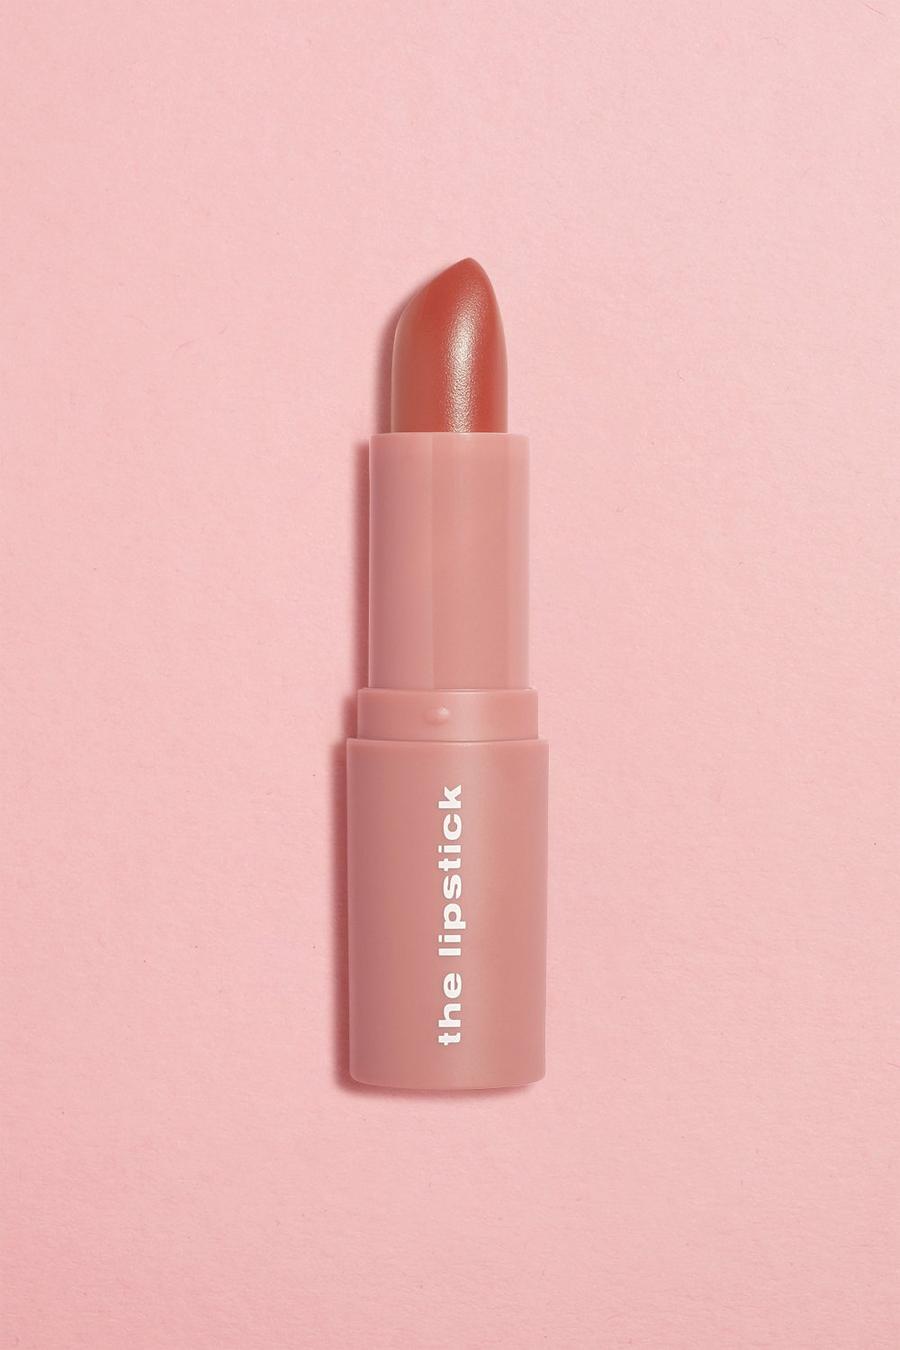 Boohoo Beauty - Rossetto The Lipstick - Terracotta image number 1